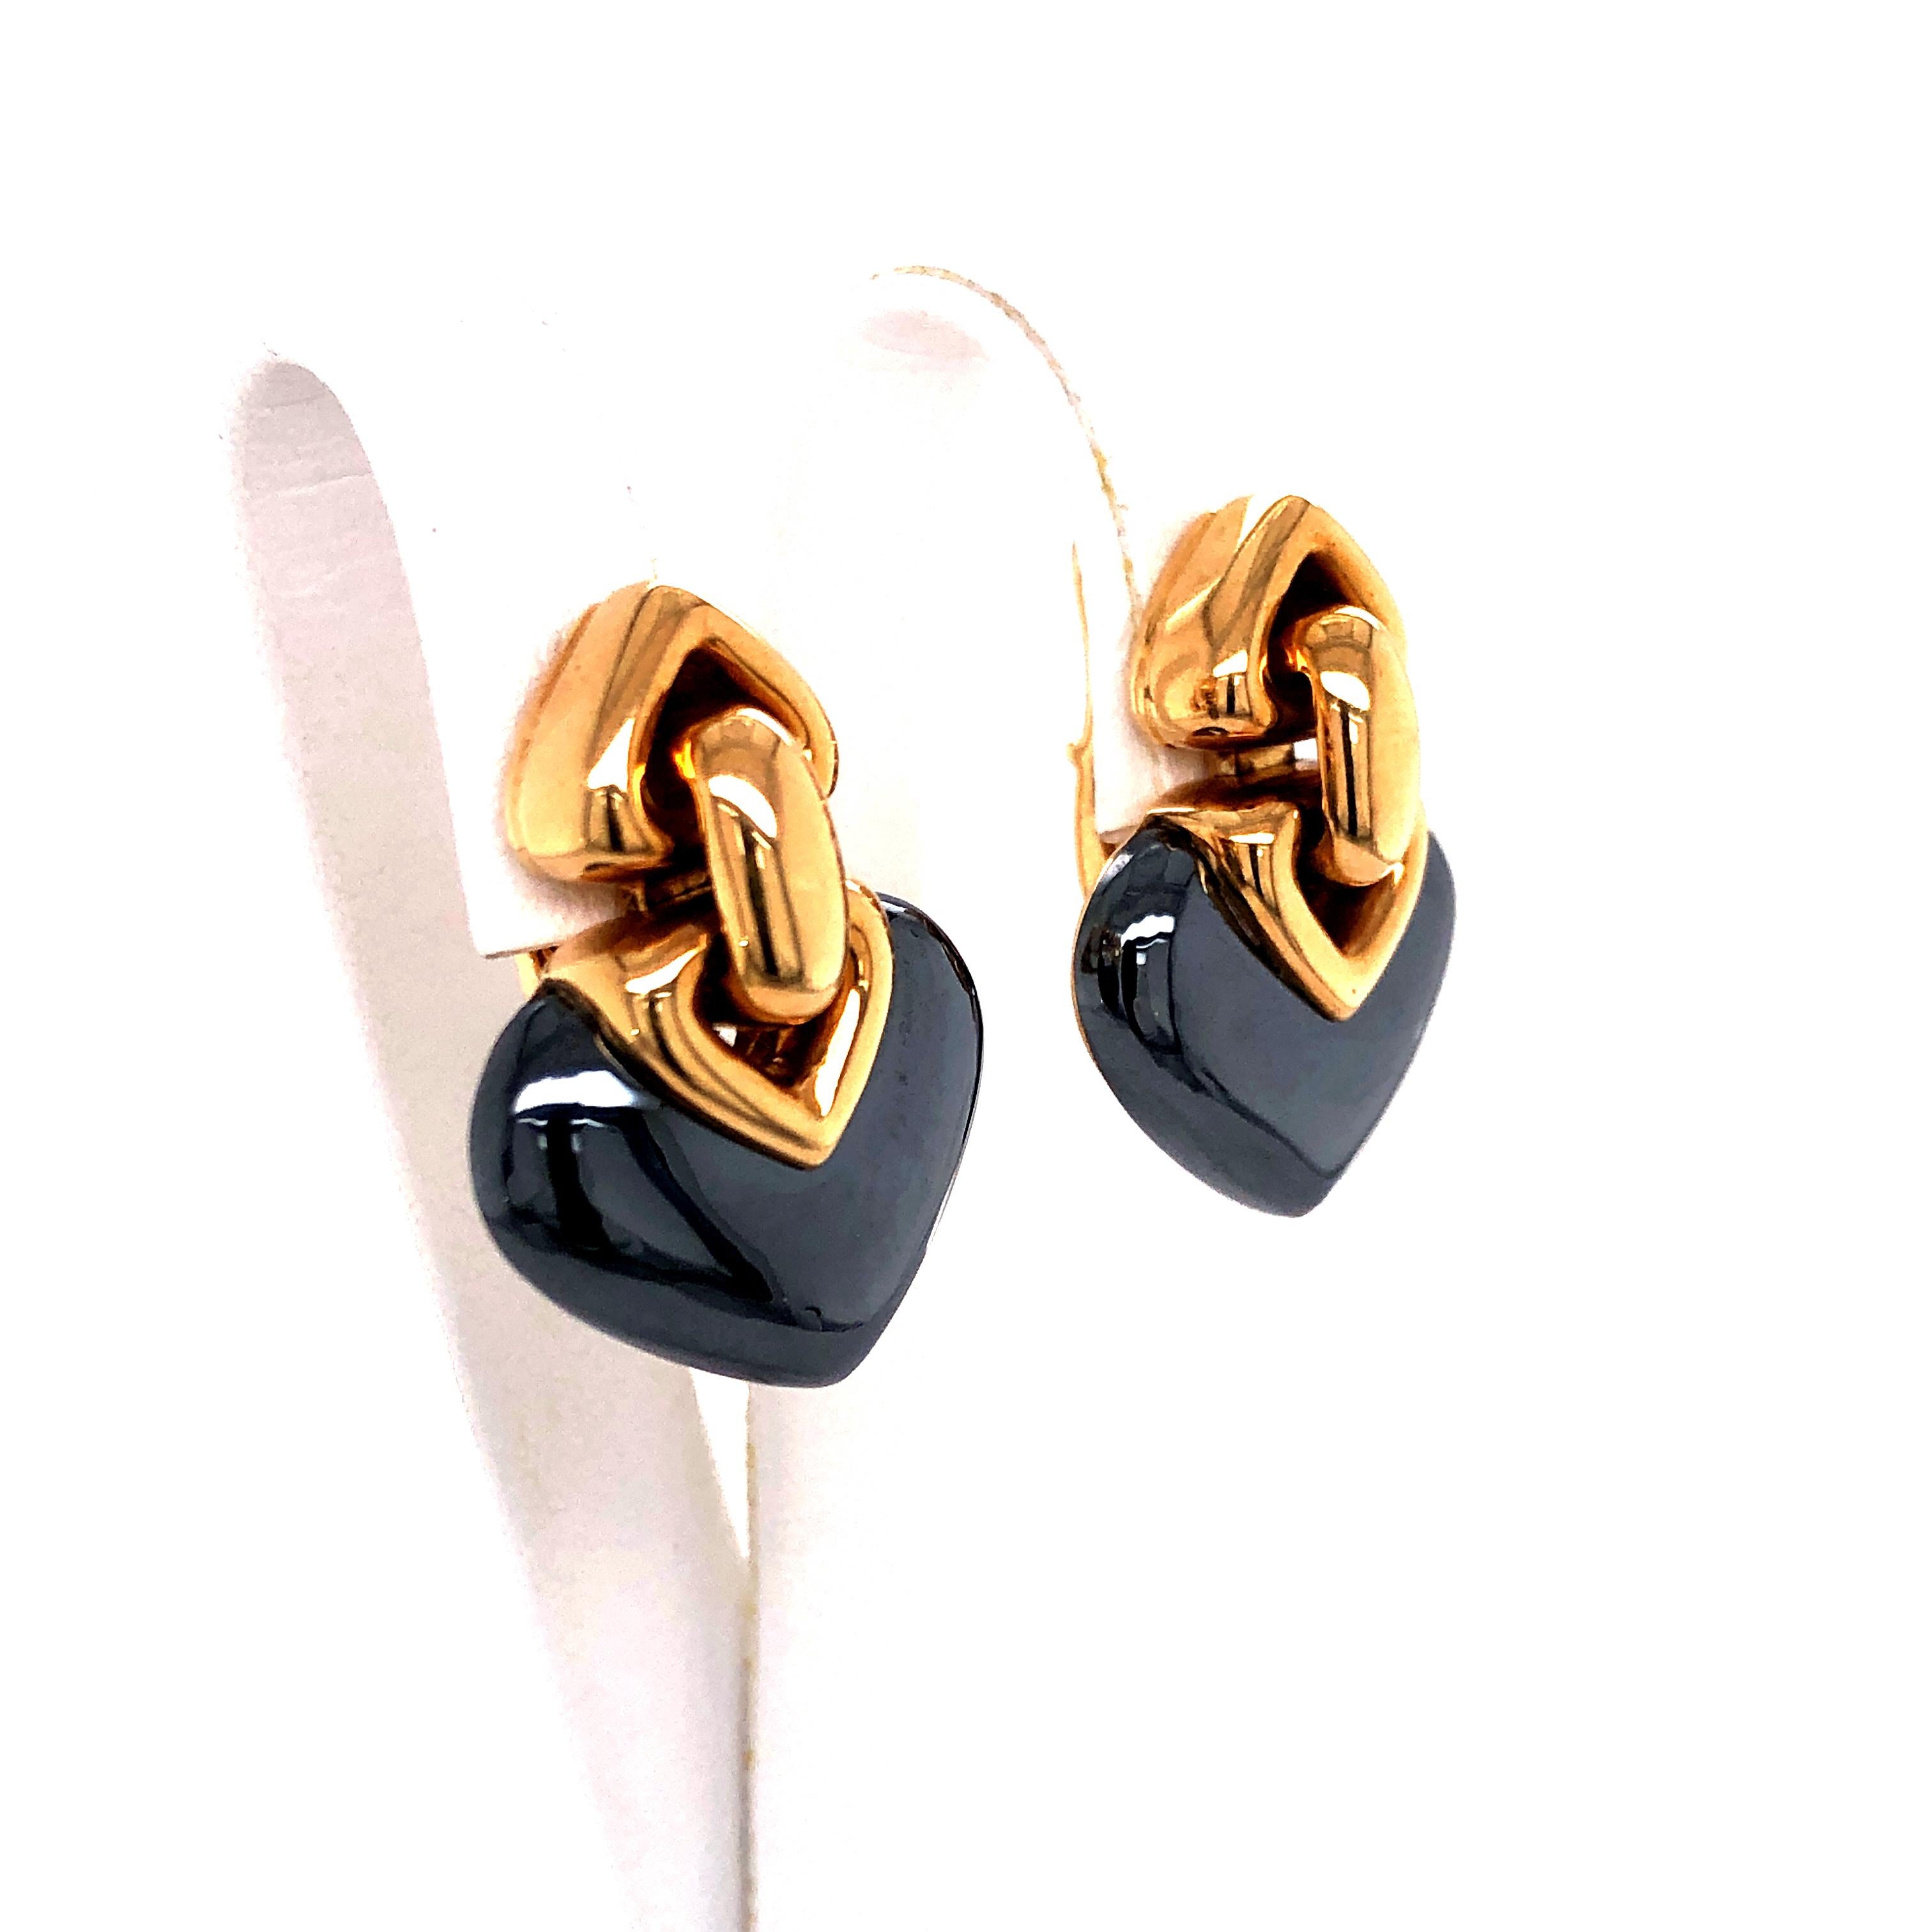 Elegant Double Heart earrings by Bulgari in yellow gold 750 with hematite.
btw: we have matching necklace, bracelet and ring.

Marker's mark: Bulgari
Assay mark: 750